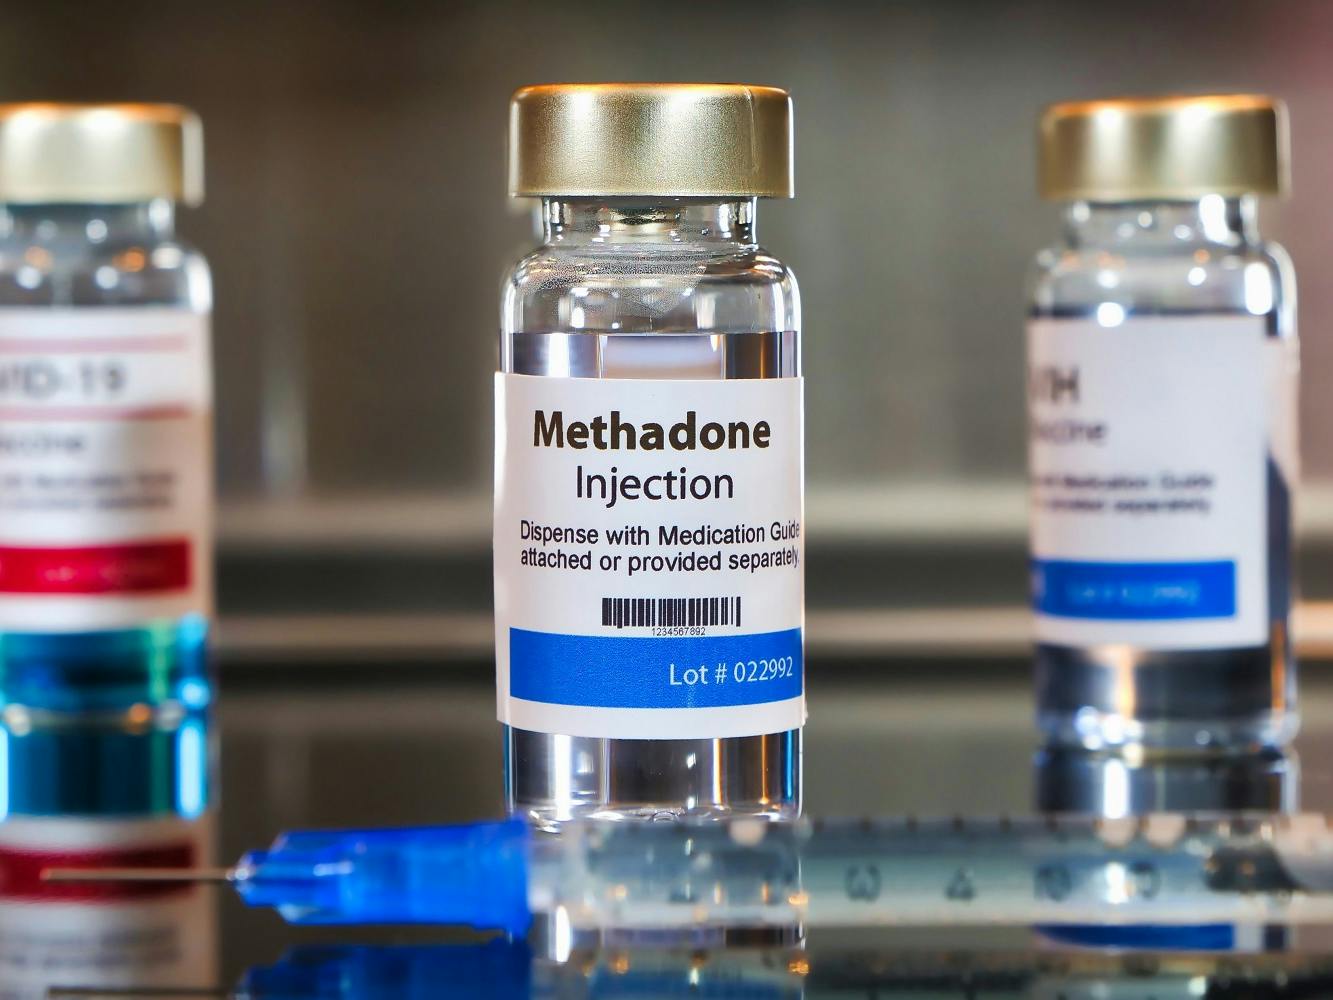 Does Medicare Cover Methadone?